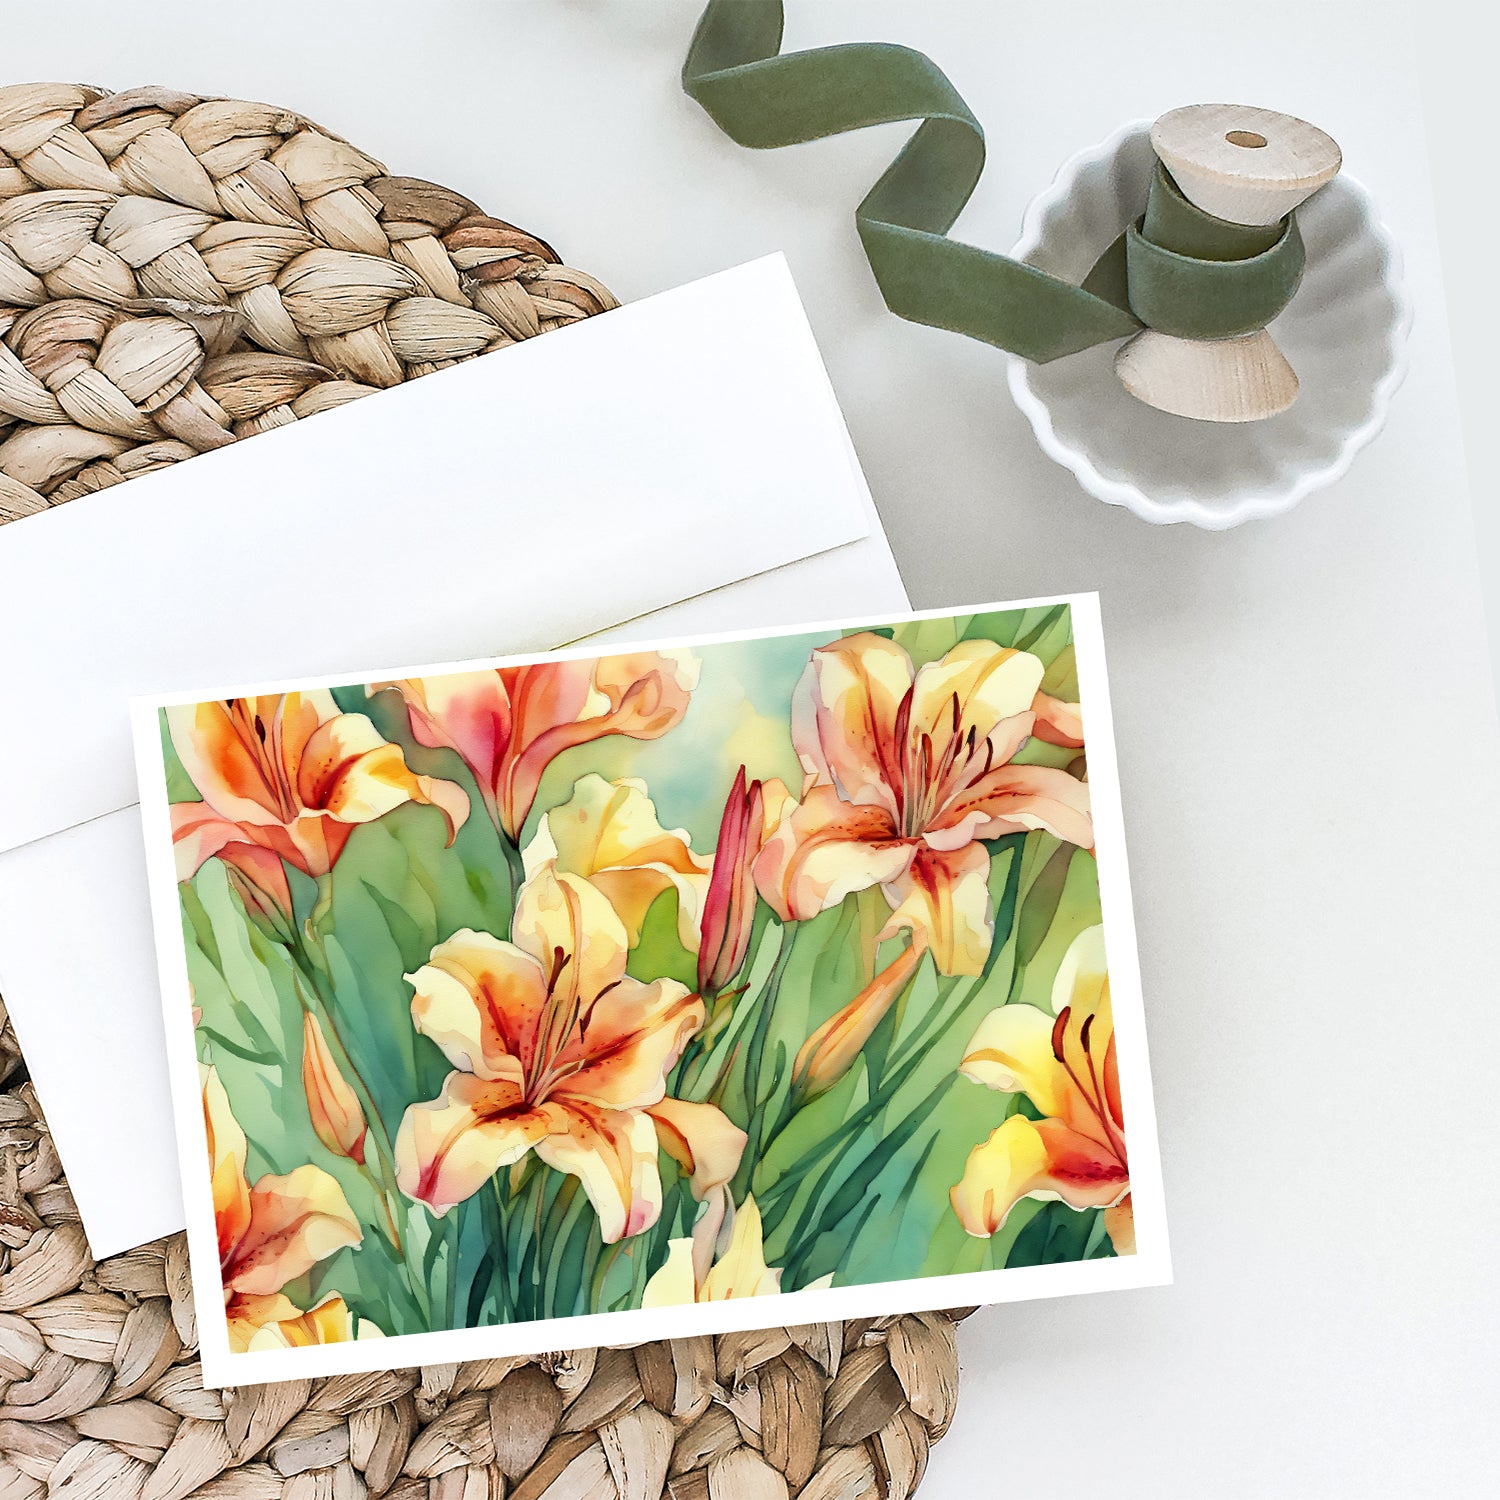 Utah Sego Lilies in Watercolor Greeting Cards and Envelopes Pack of 8